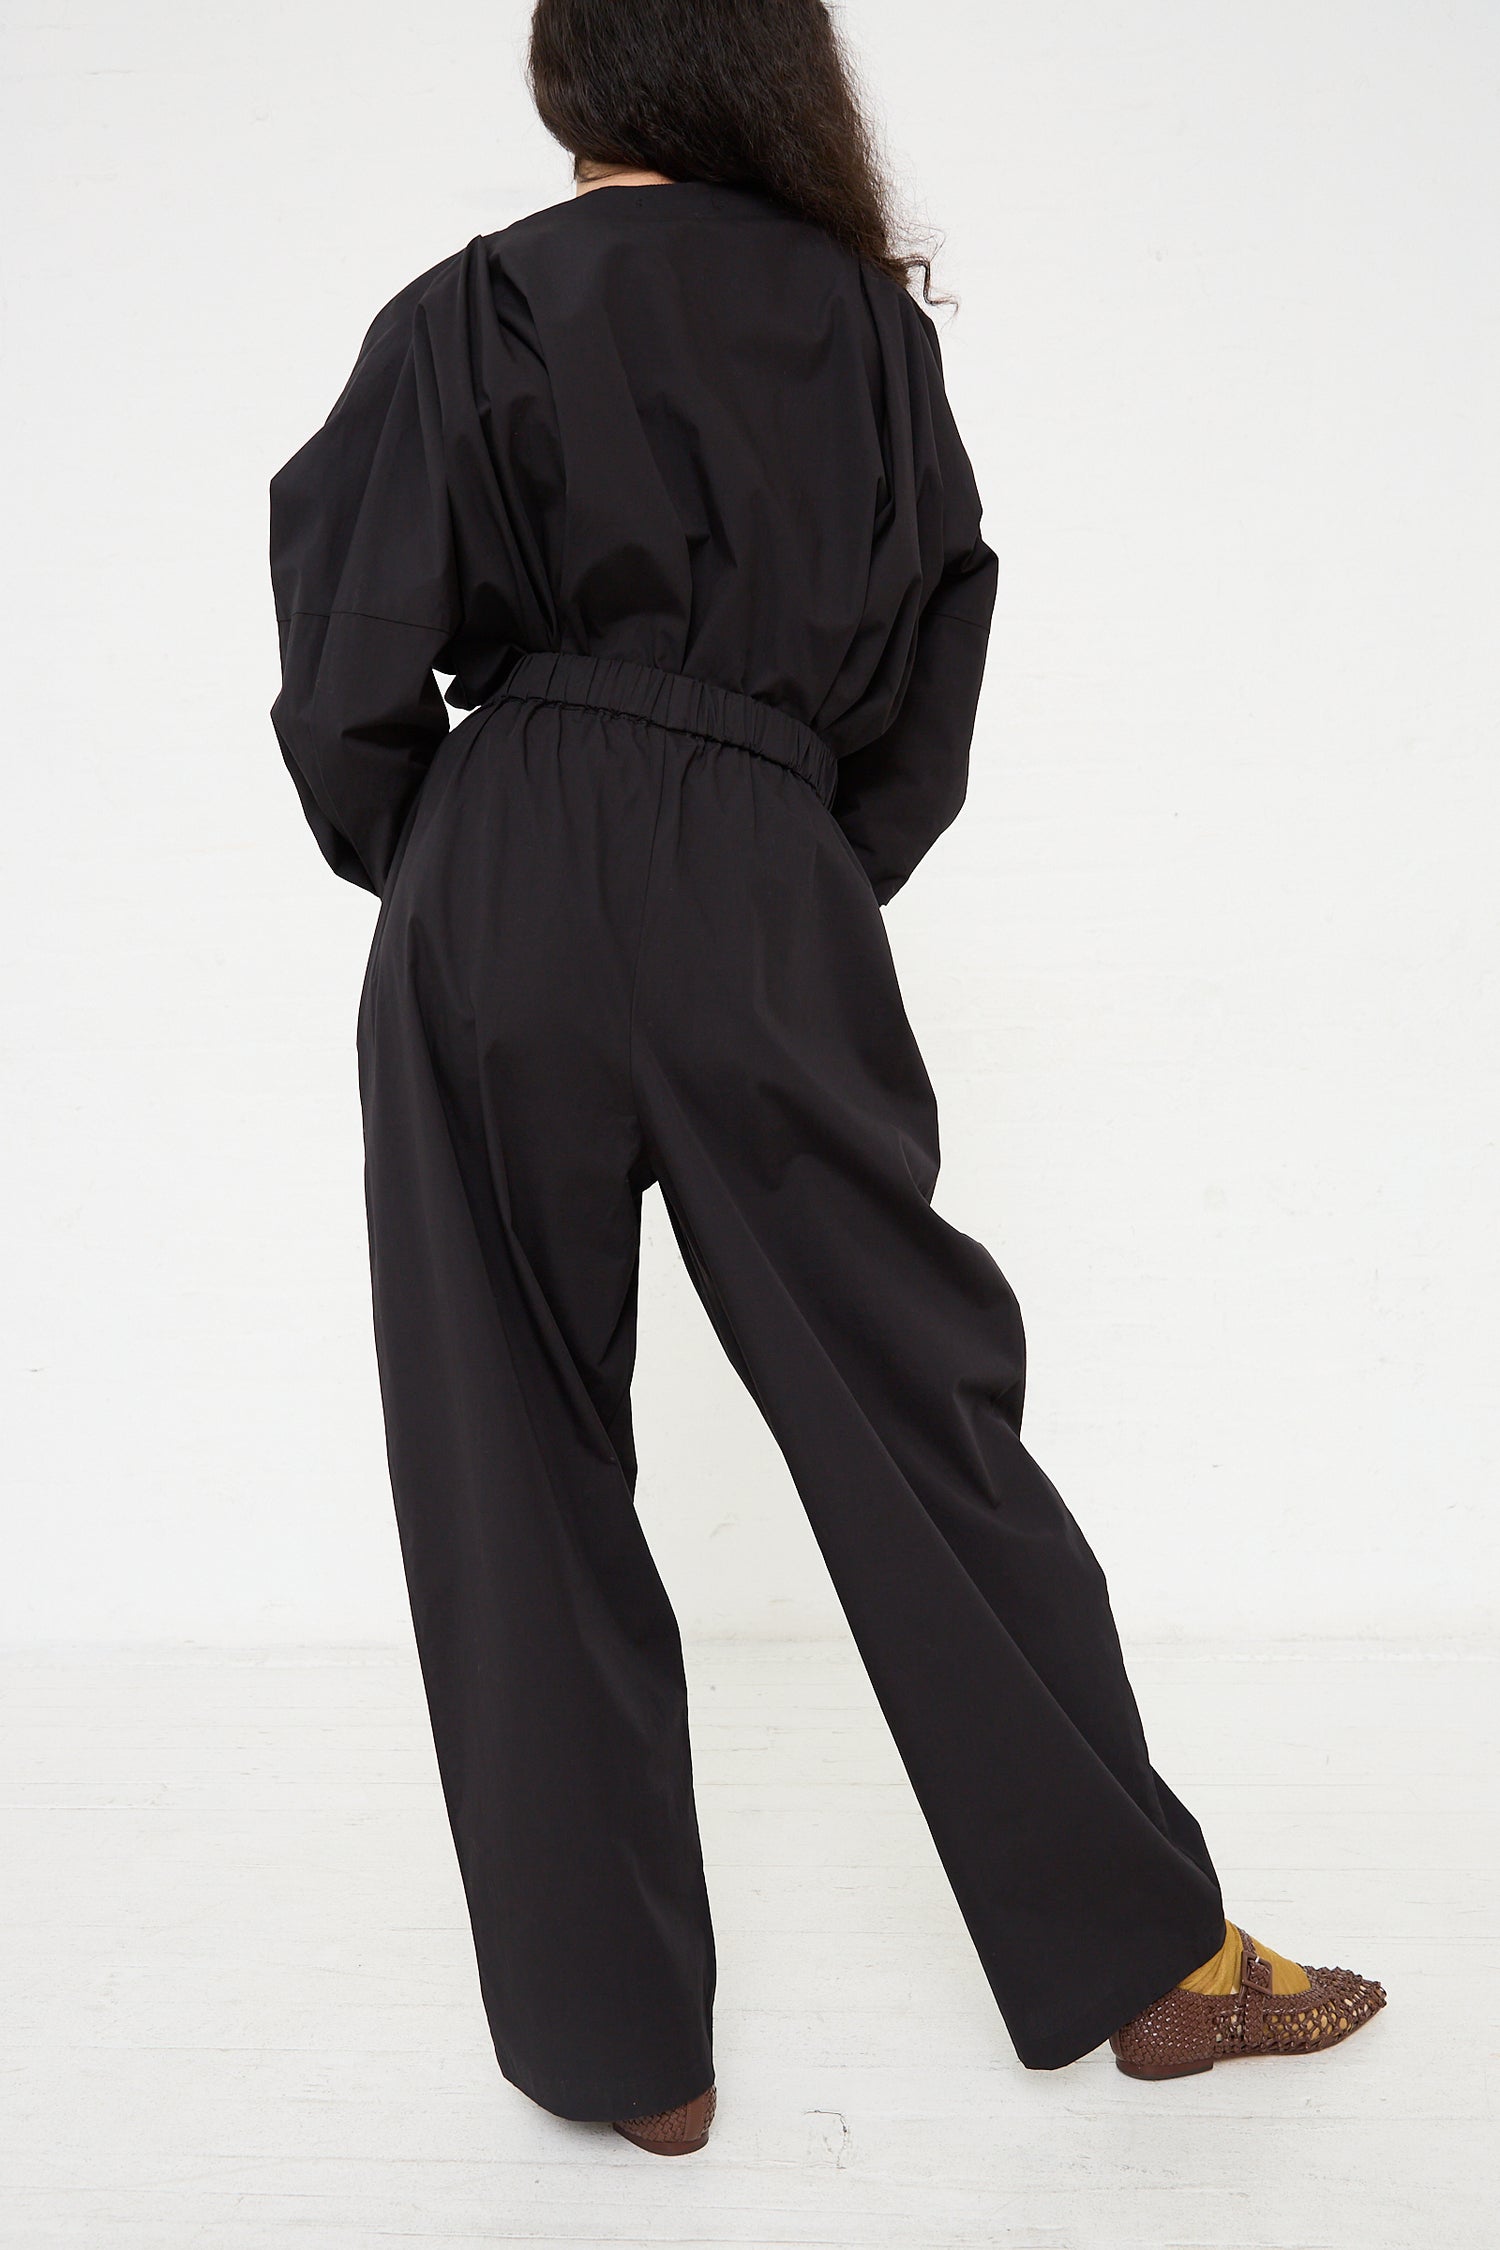 Woman wearing a Black Crane Organic Cotton Straight Draped Pant in Black with gathered waist from behind, paired with patterned shoes.